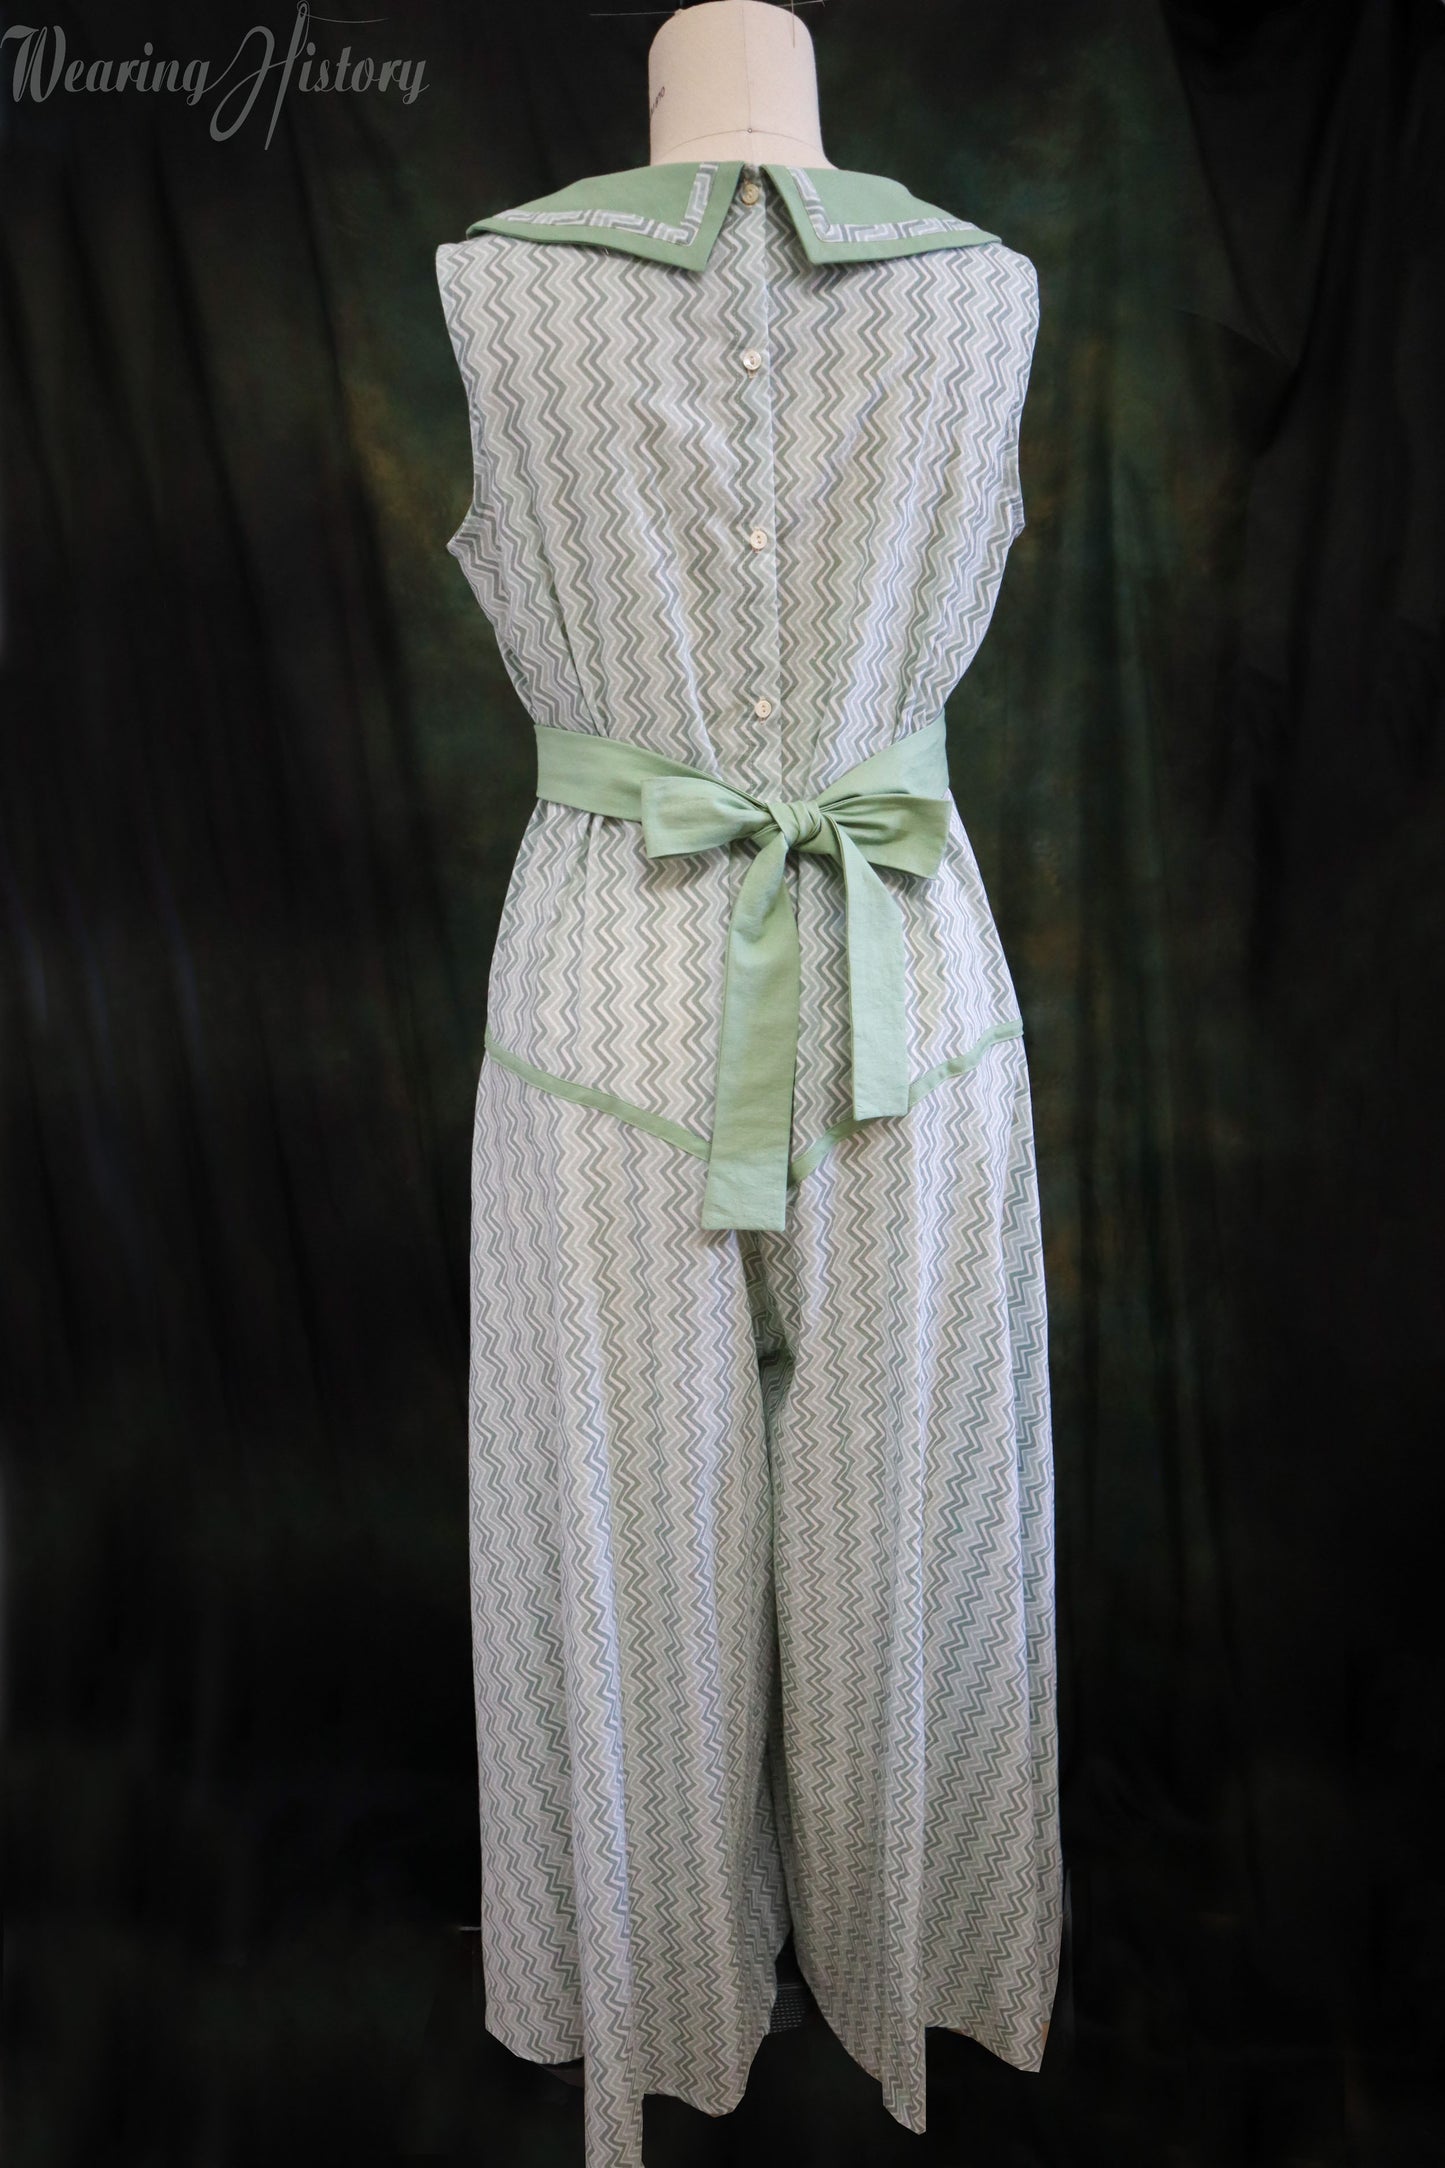 E-Pattern- Lounging at the Lido- 1930s Beach or Lounging Pyjamas and Eton Jacket- 30"-46” Bust